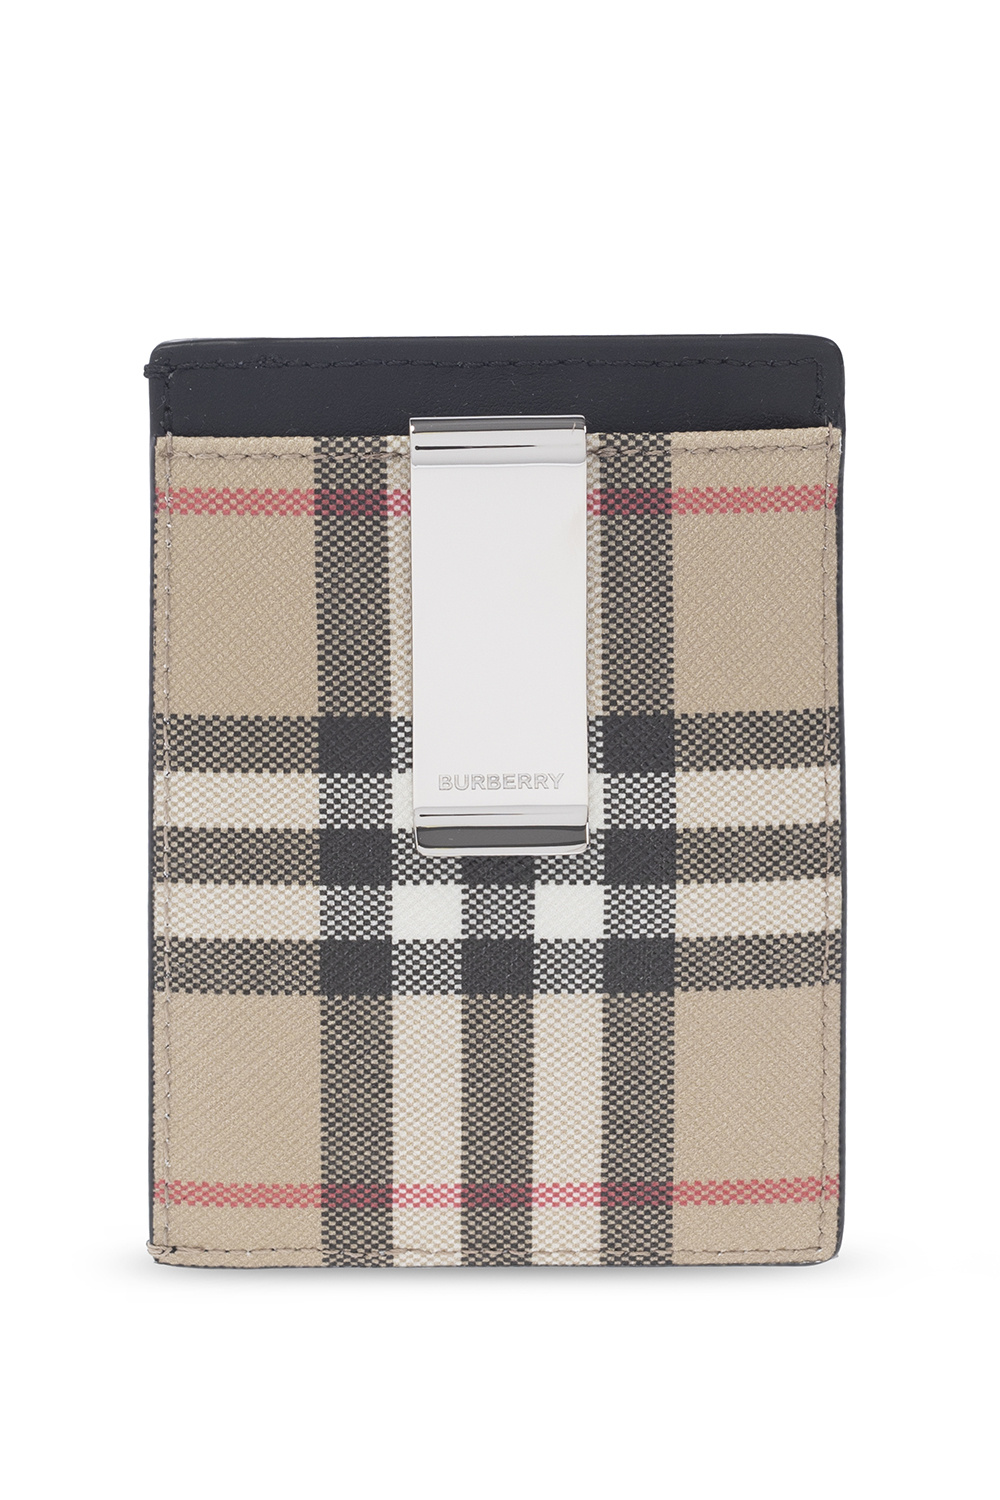 Burberry Card holder with Vintage check | Men's Accessories | Vitkac